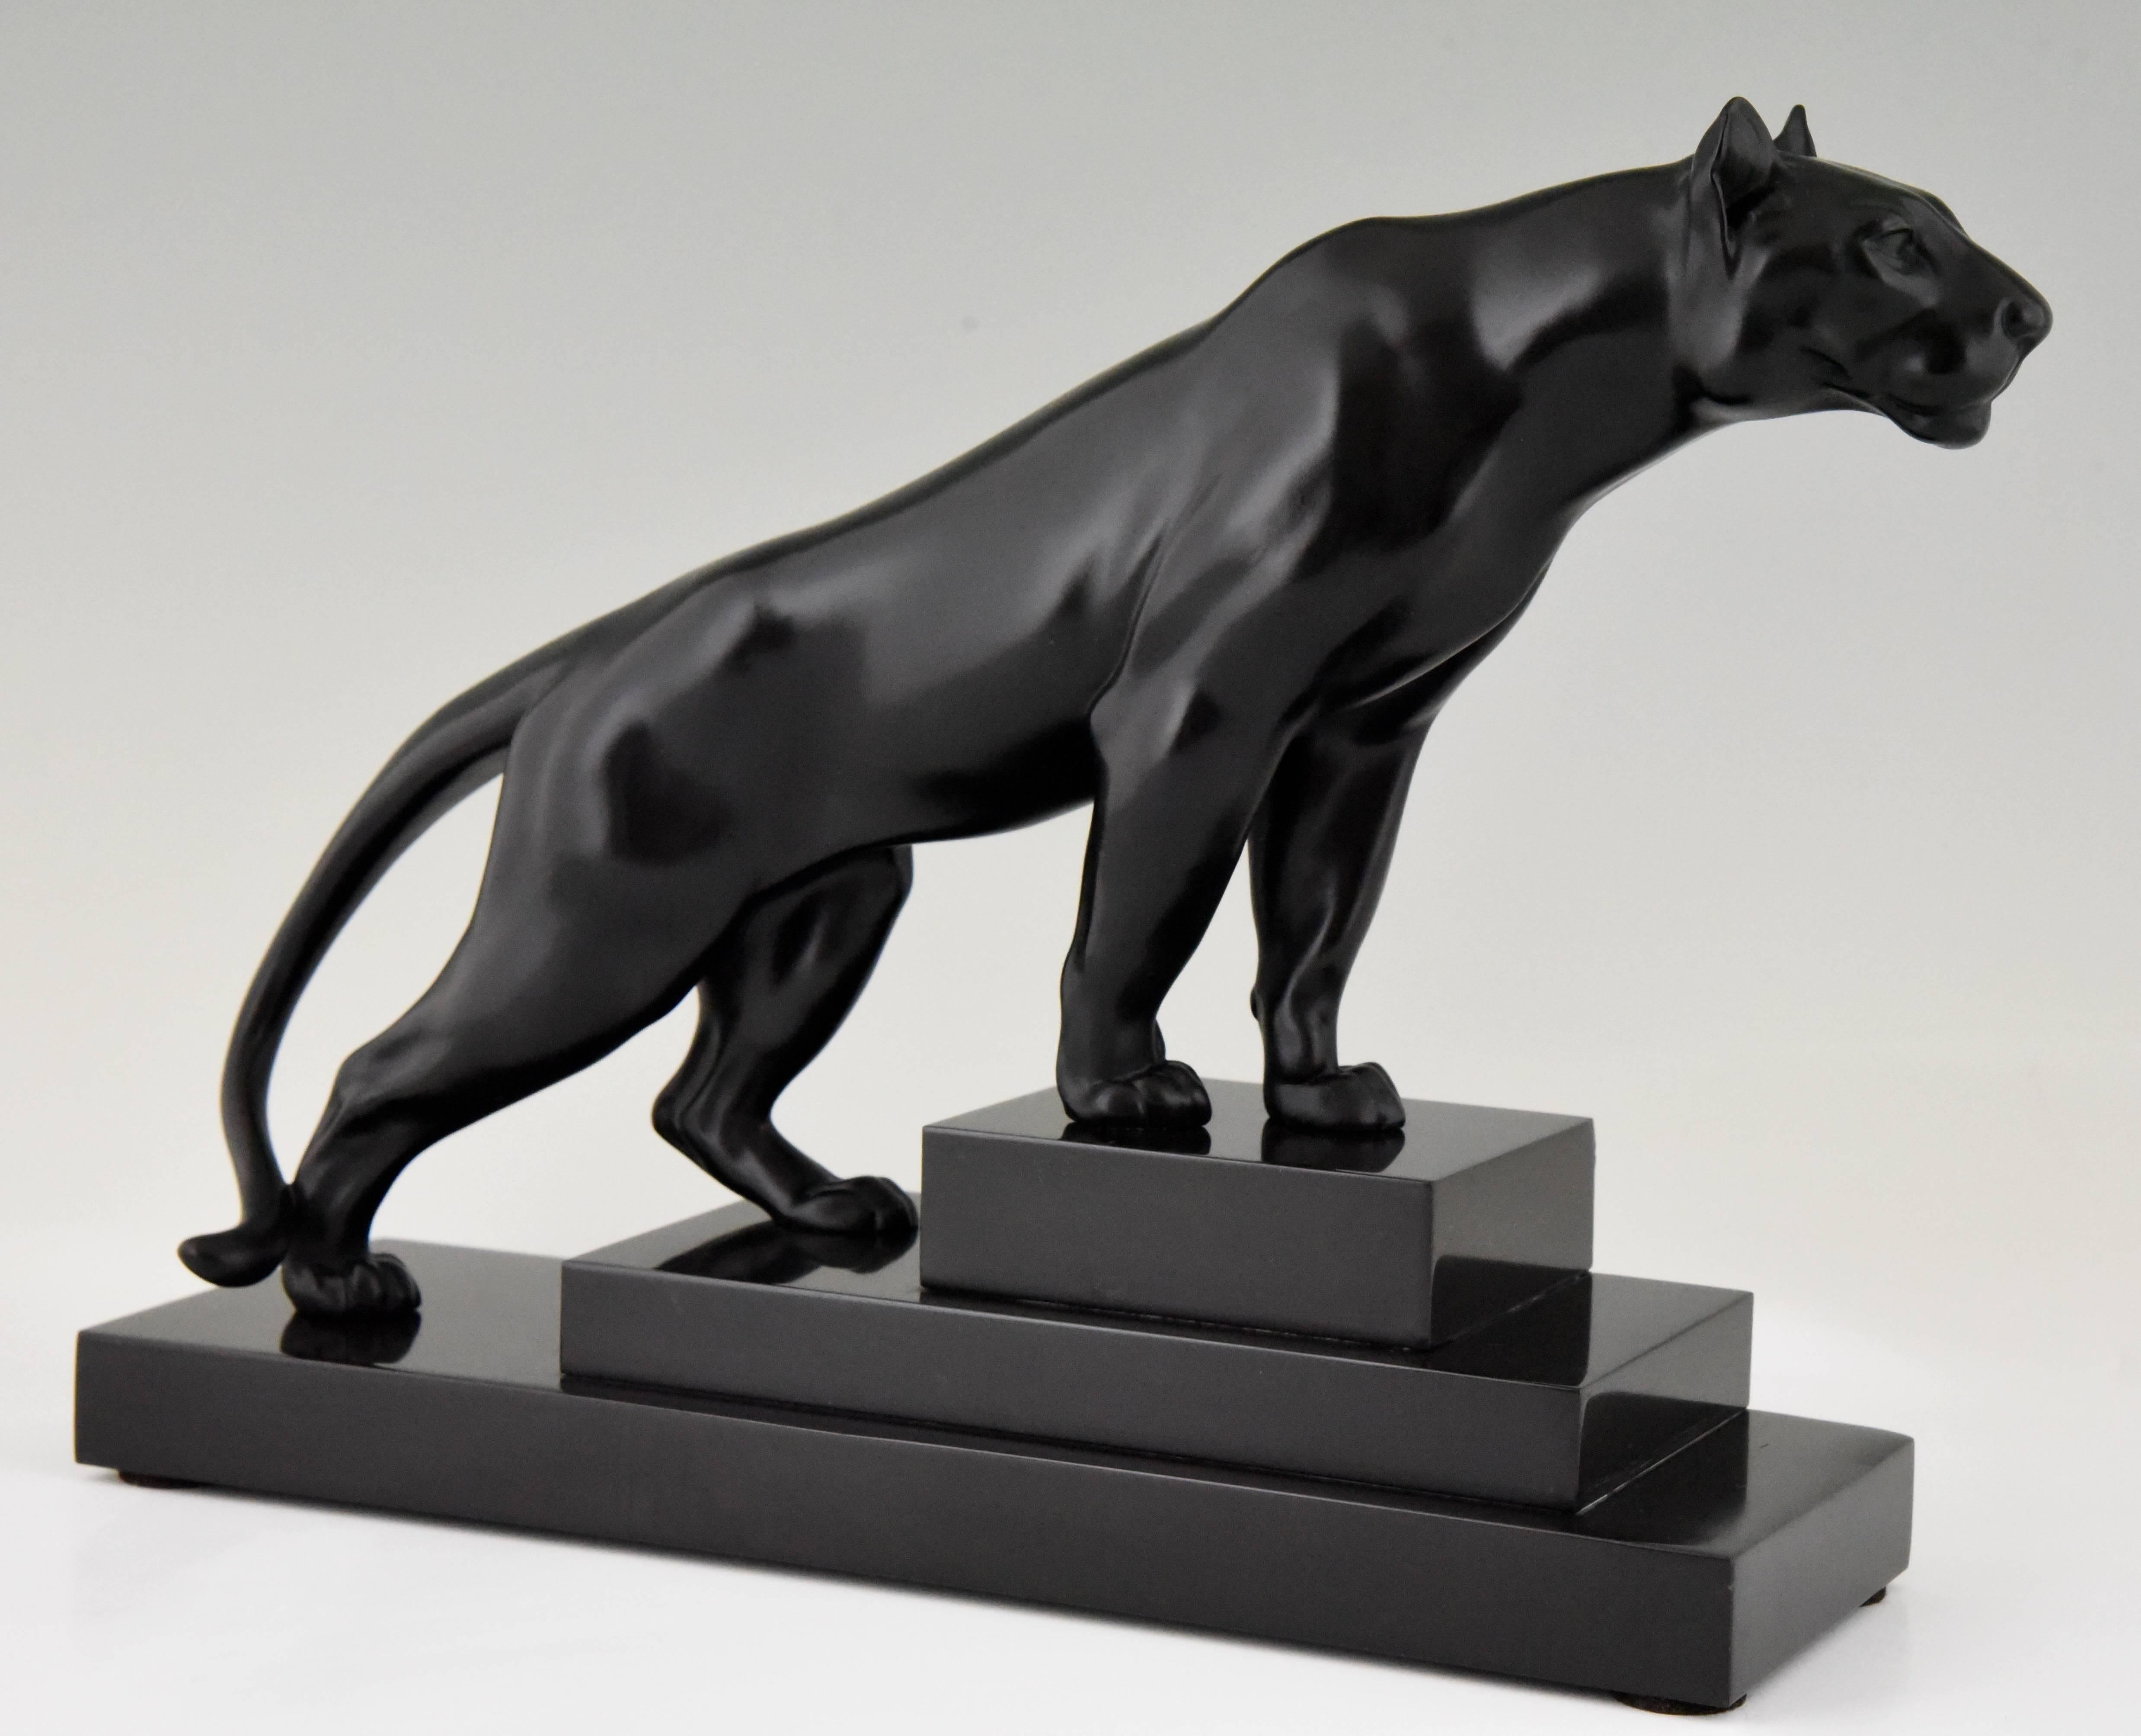 Hard to find Art Deco panther by the French artist Max Le Verrier on a stepped Belgian black marble base.
Artist/ Maker: Max Le Verrier
Signature/ Marks: M. Le Verrier
Style: Art Deco
Date: 1930
Material: Art metal with black patina. Belgian